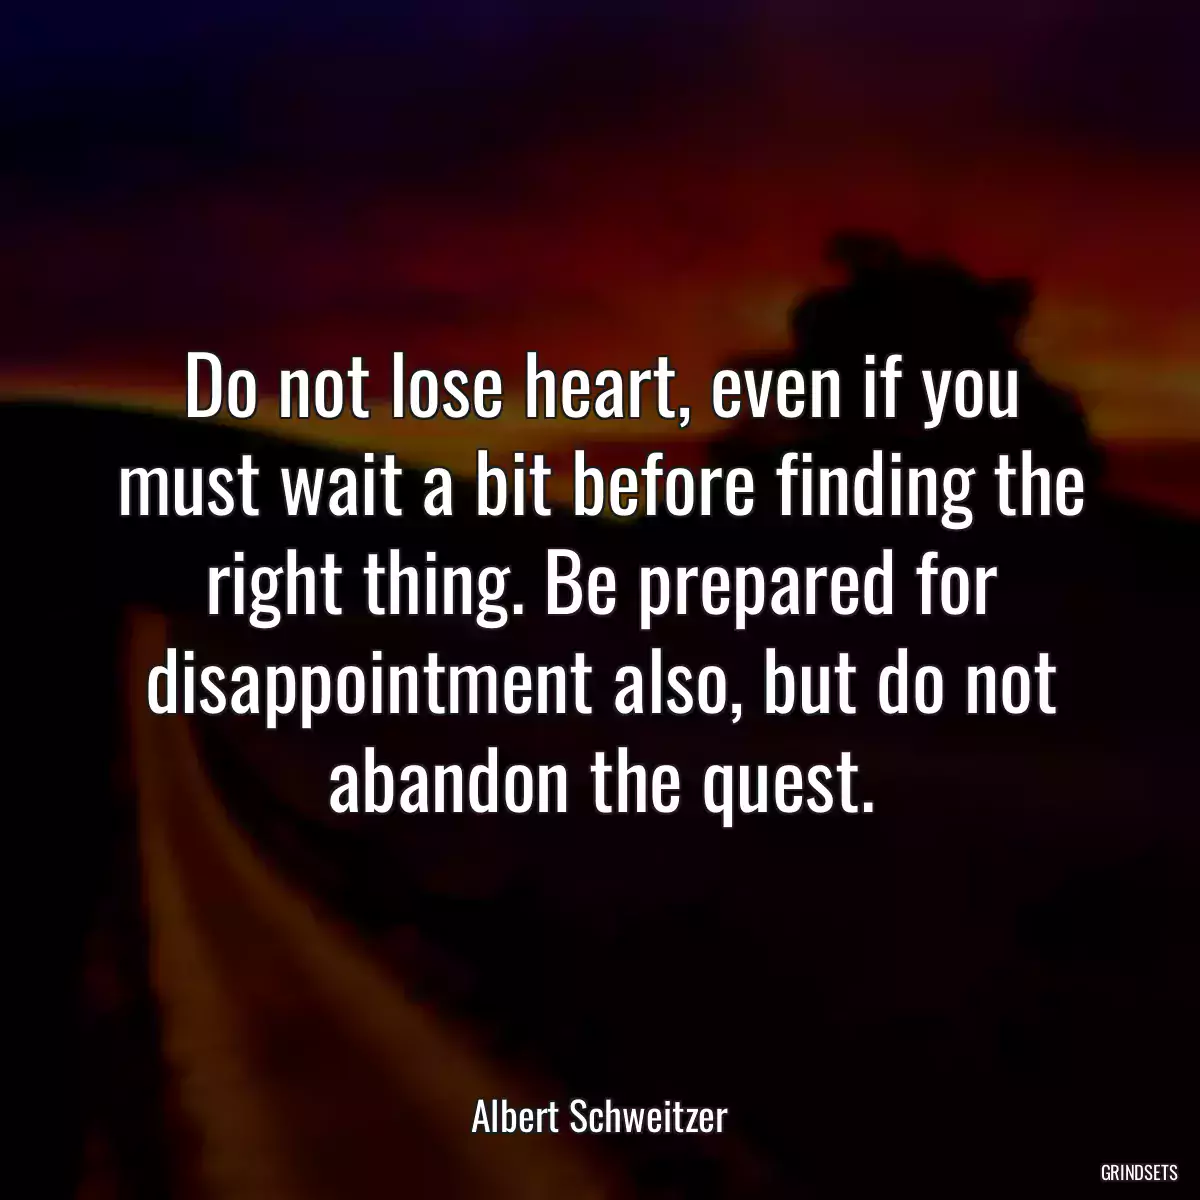 Do not lose heart, even if you must wait a bit before finding the right thing. Be prepared for disappointment also, but do not abandon the quest.